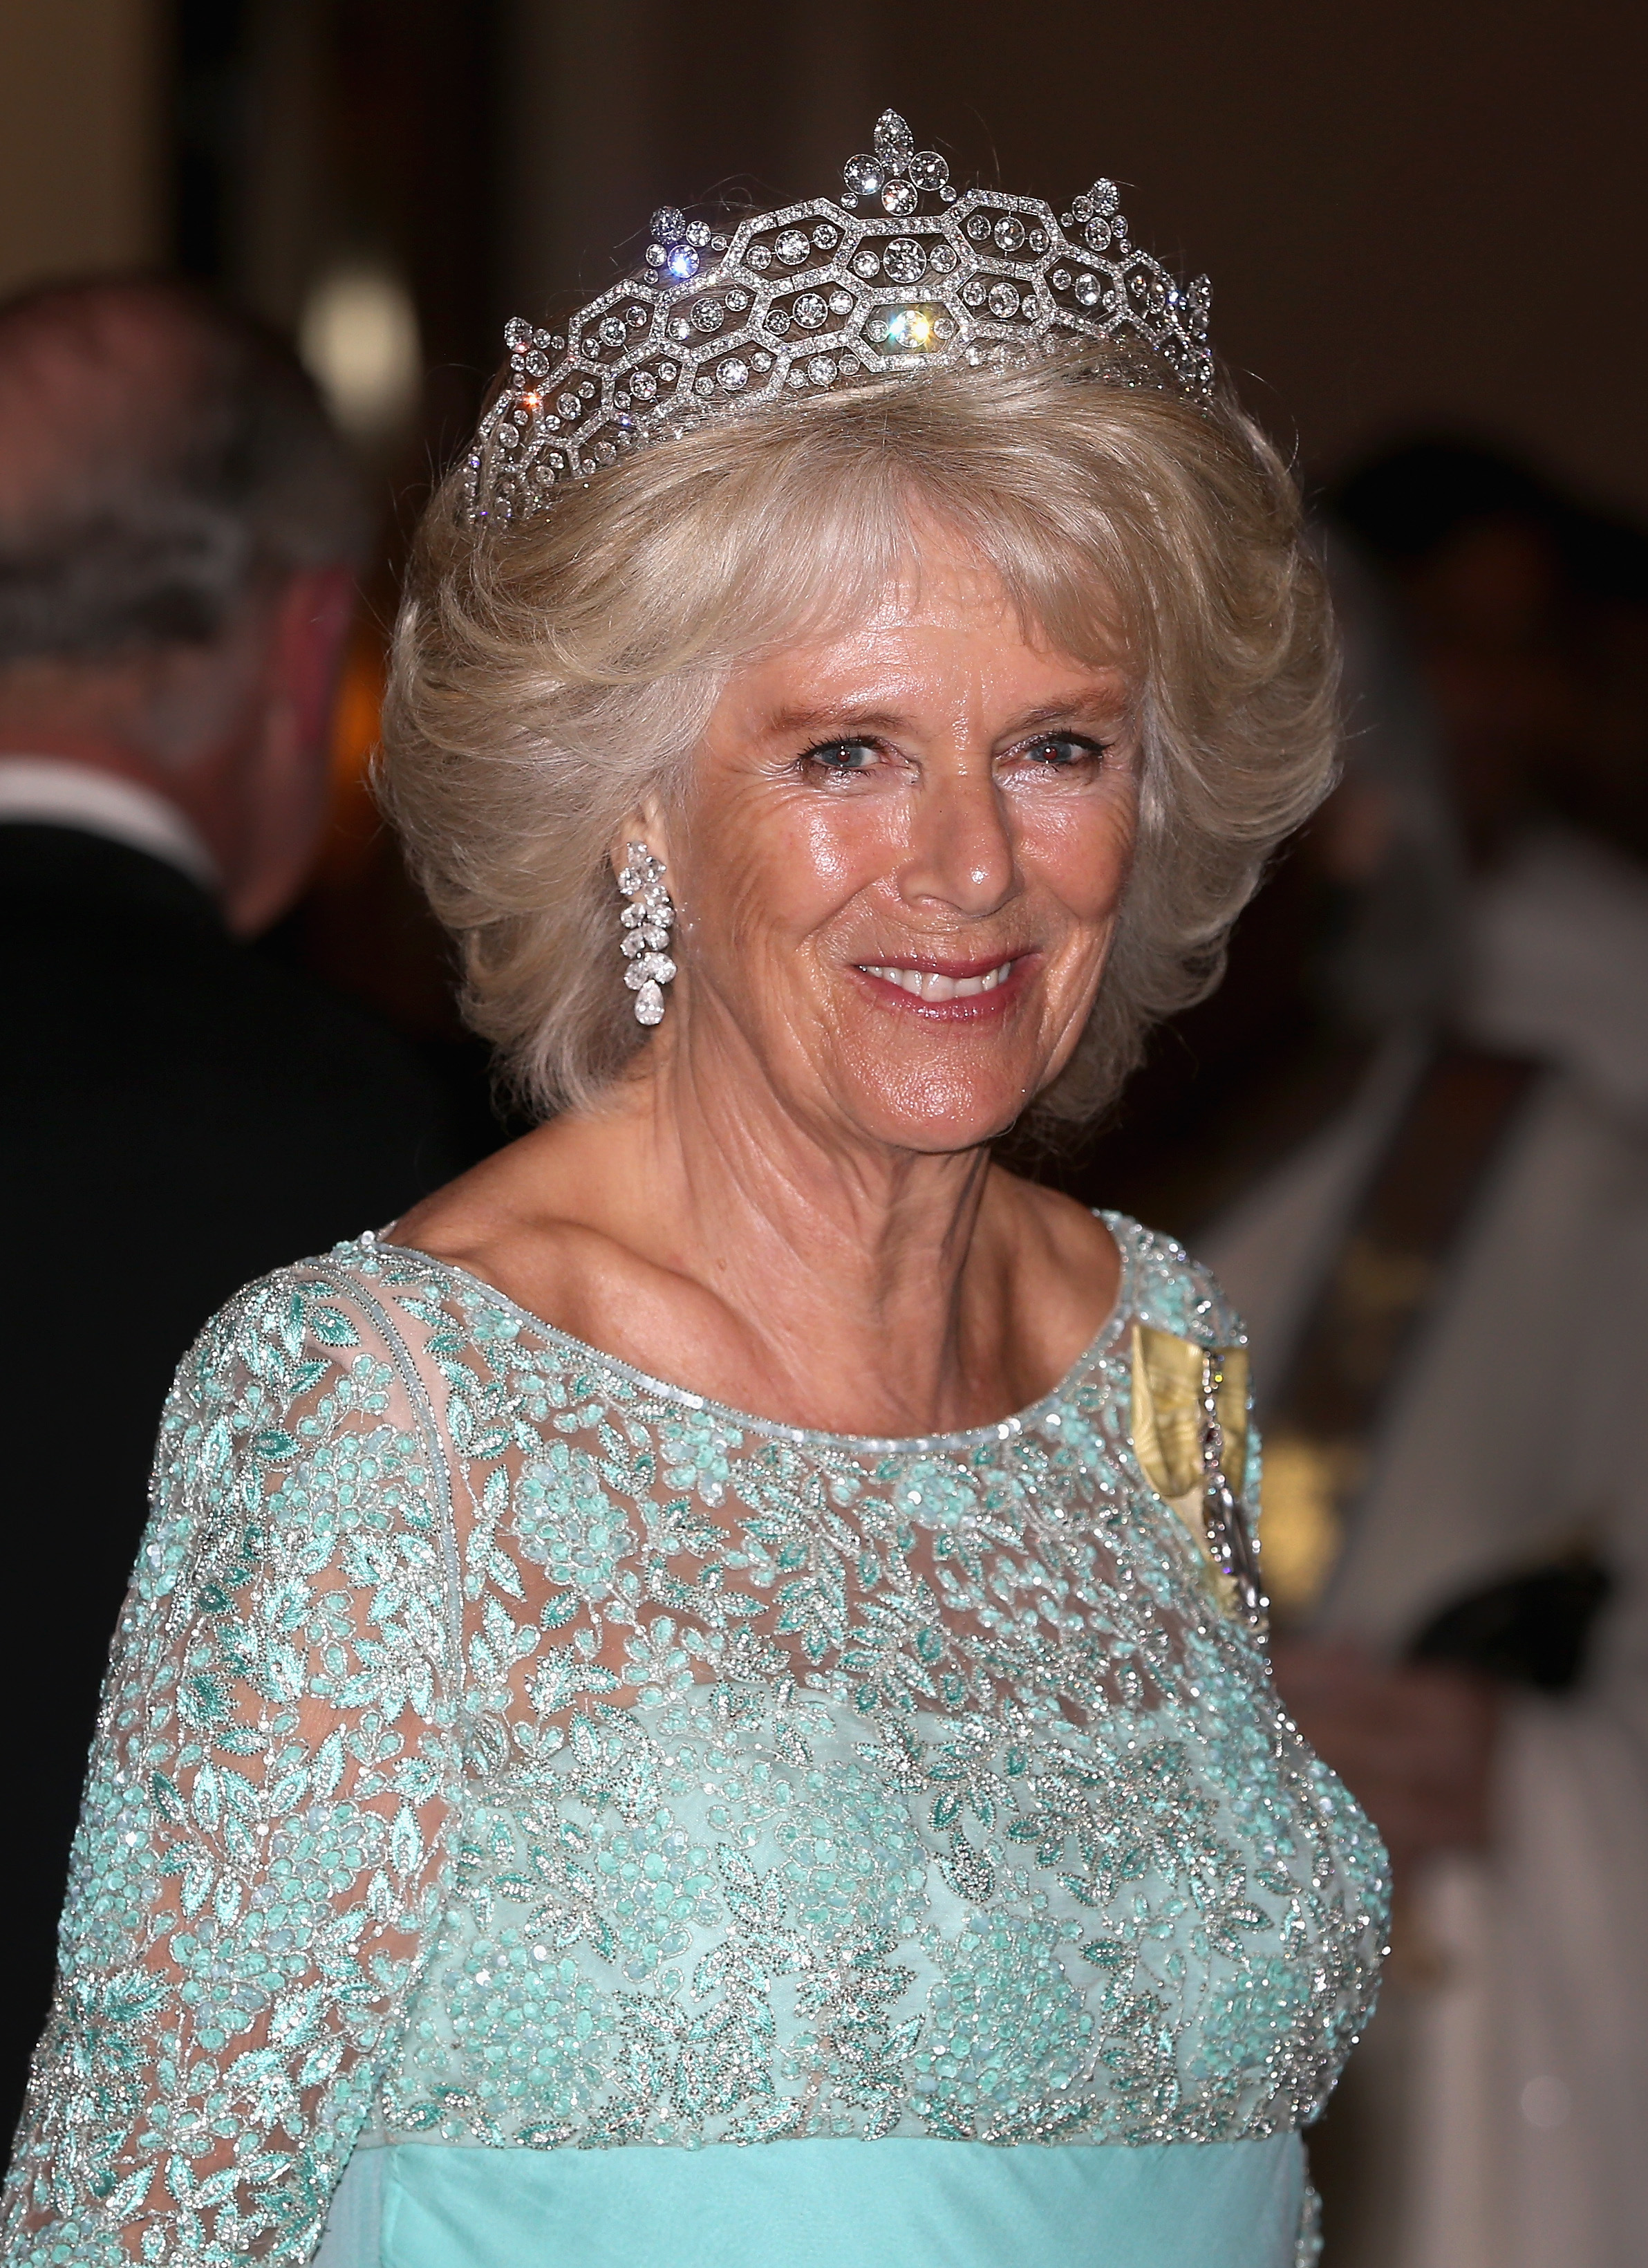 Camilla Parker Bowles in a baby blue gown and a tiara at the CHOGM Dinner at the Cinnamon Lakeside Hotel during the Commonwealth Heads of Government